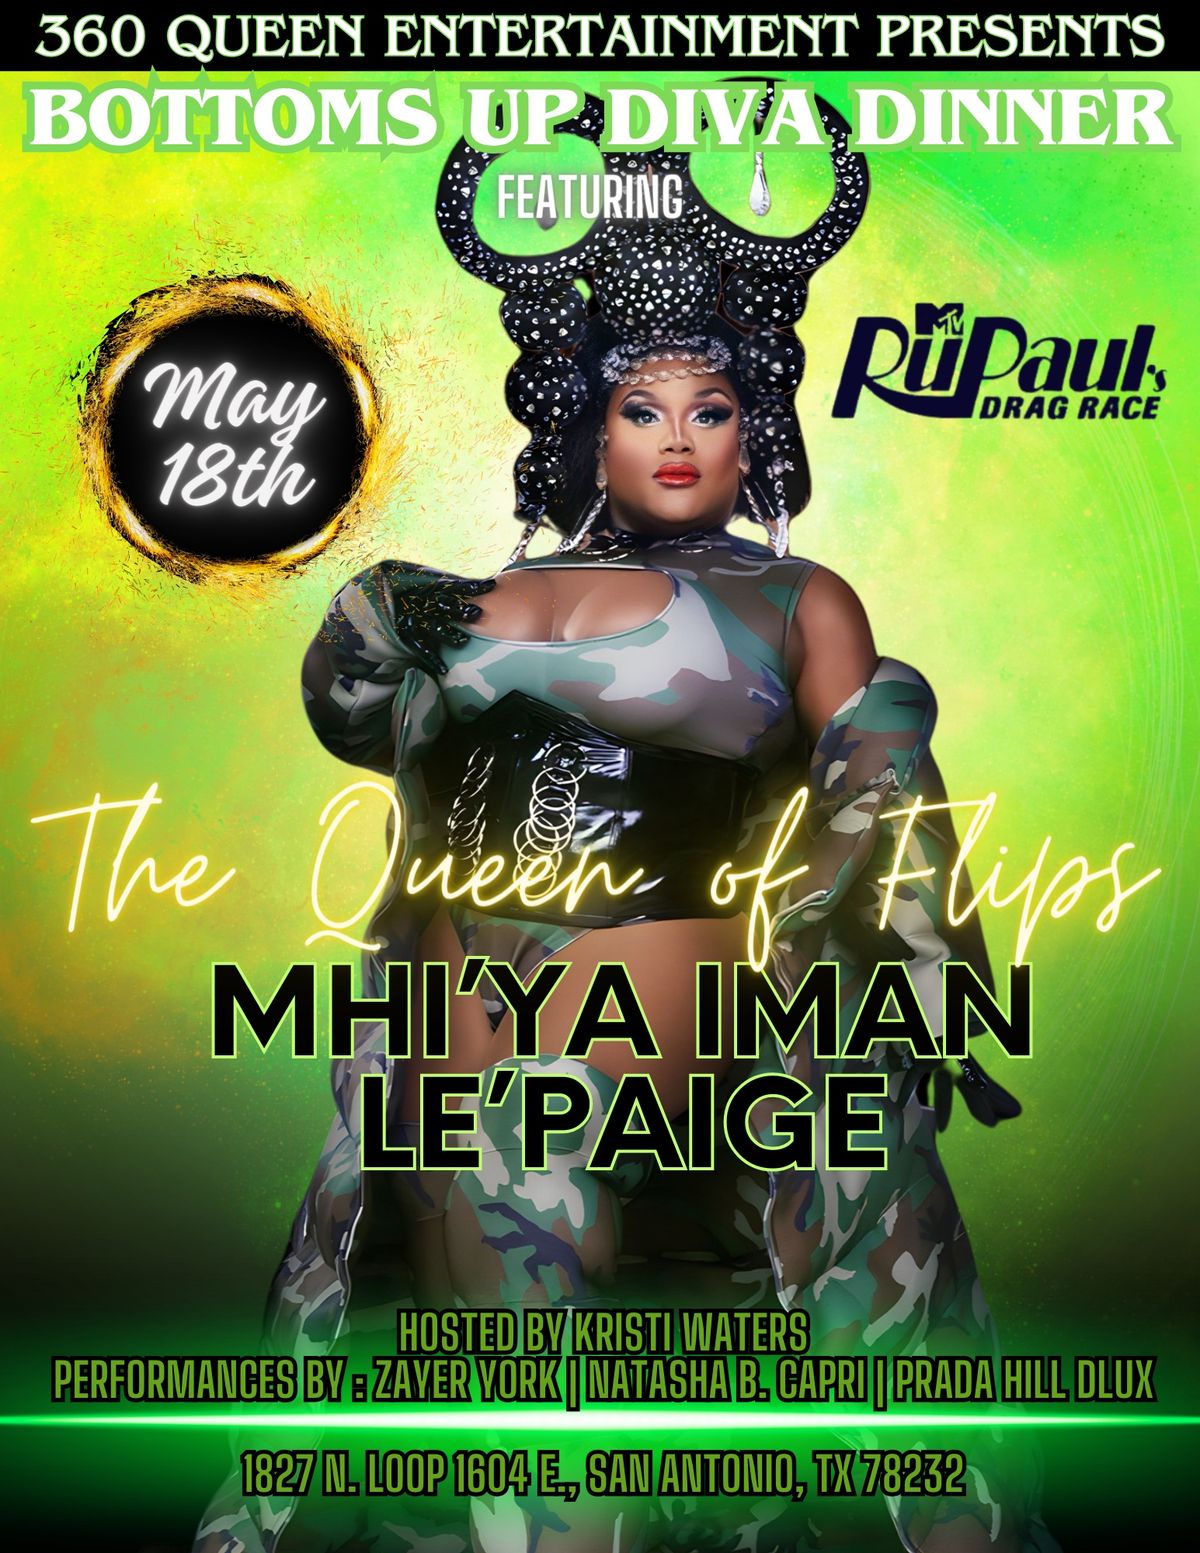 THE BOTTOMS UP DIVA DINNER FEATURING THE QUEEN OF FLIPS, MHI\u2019YA IMAN LE\u2019PAIGE